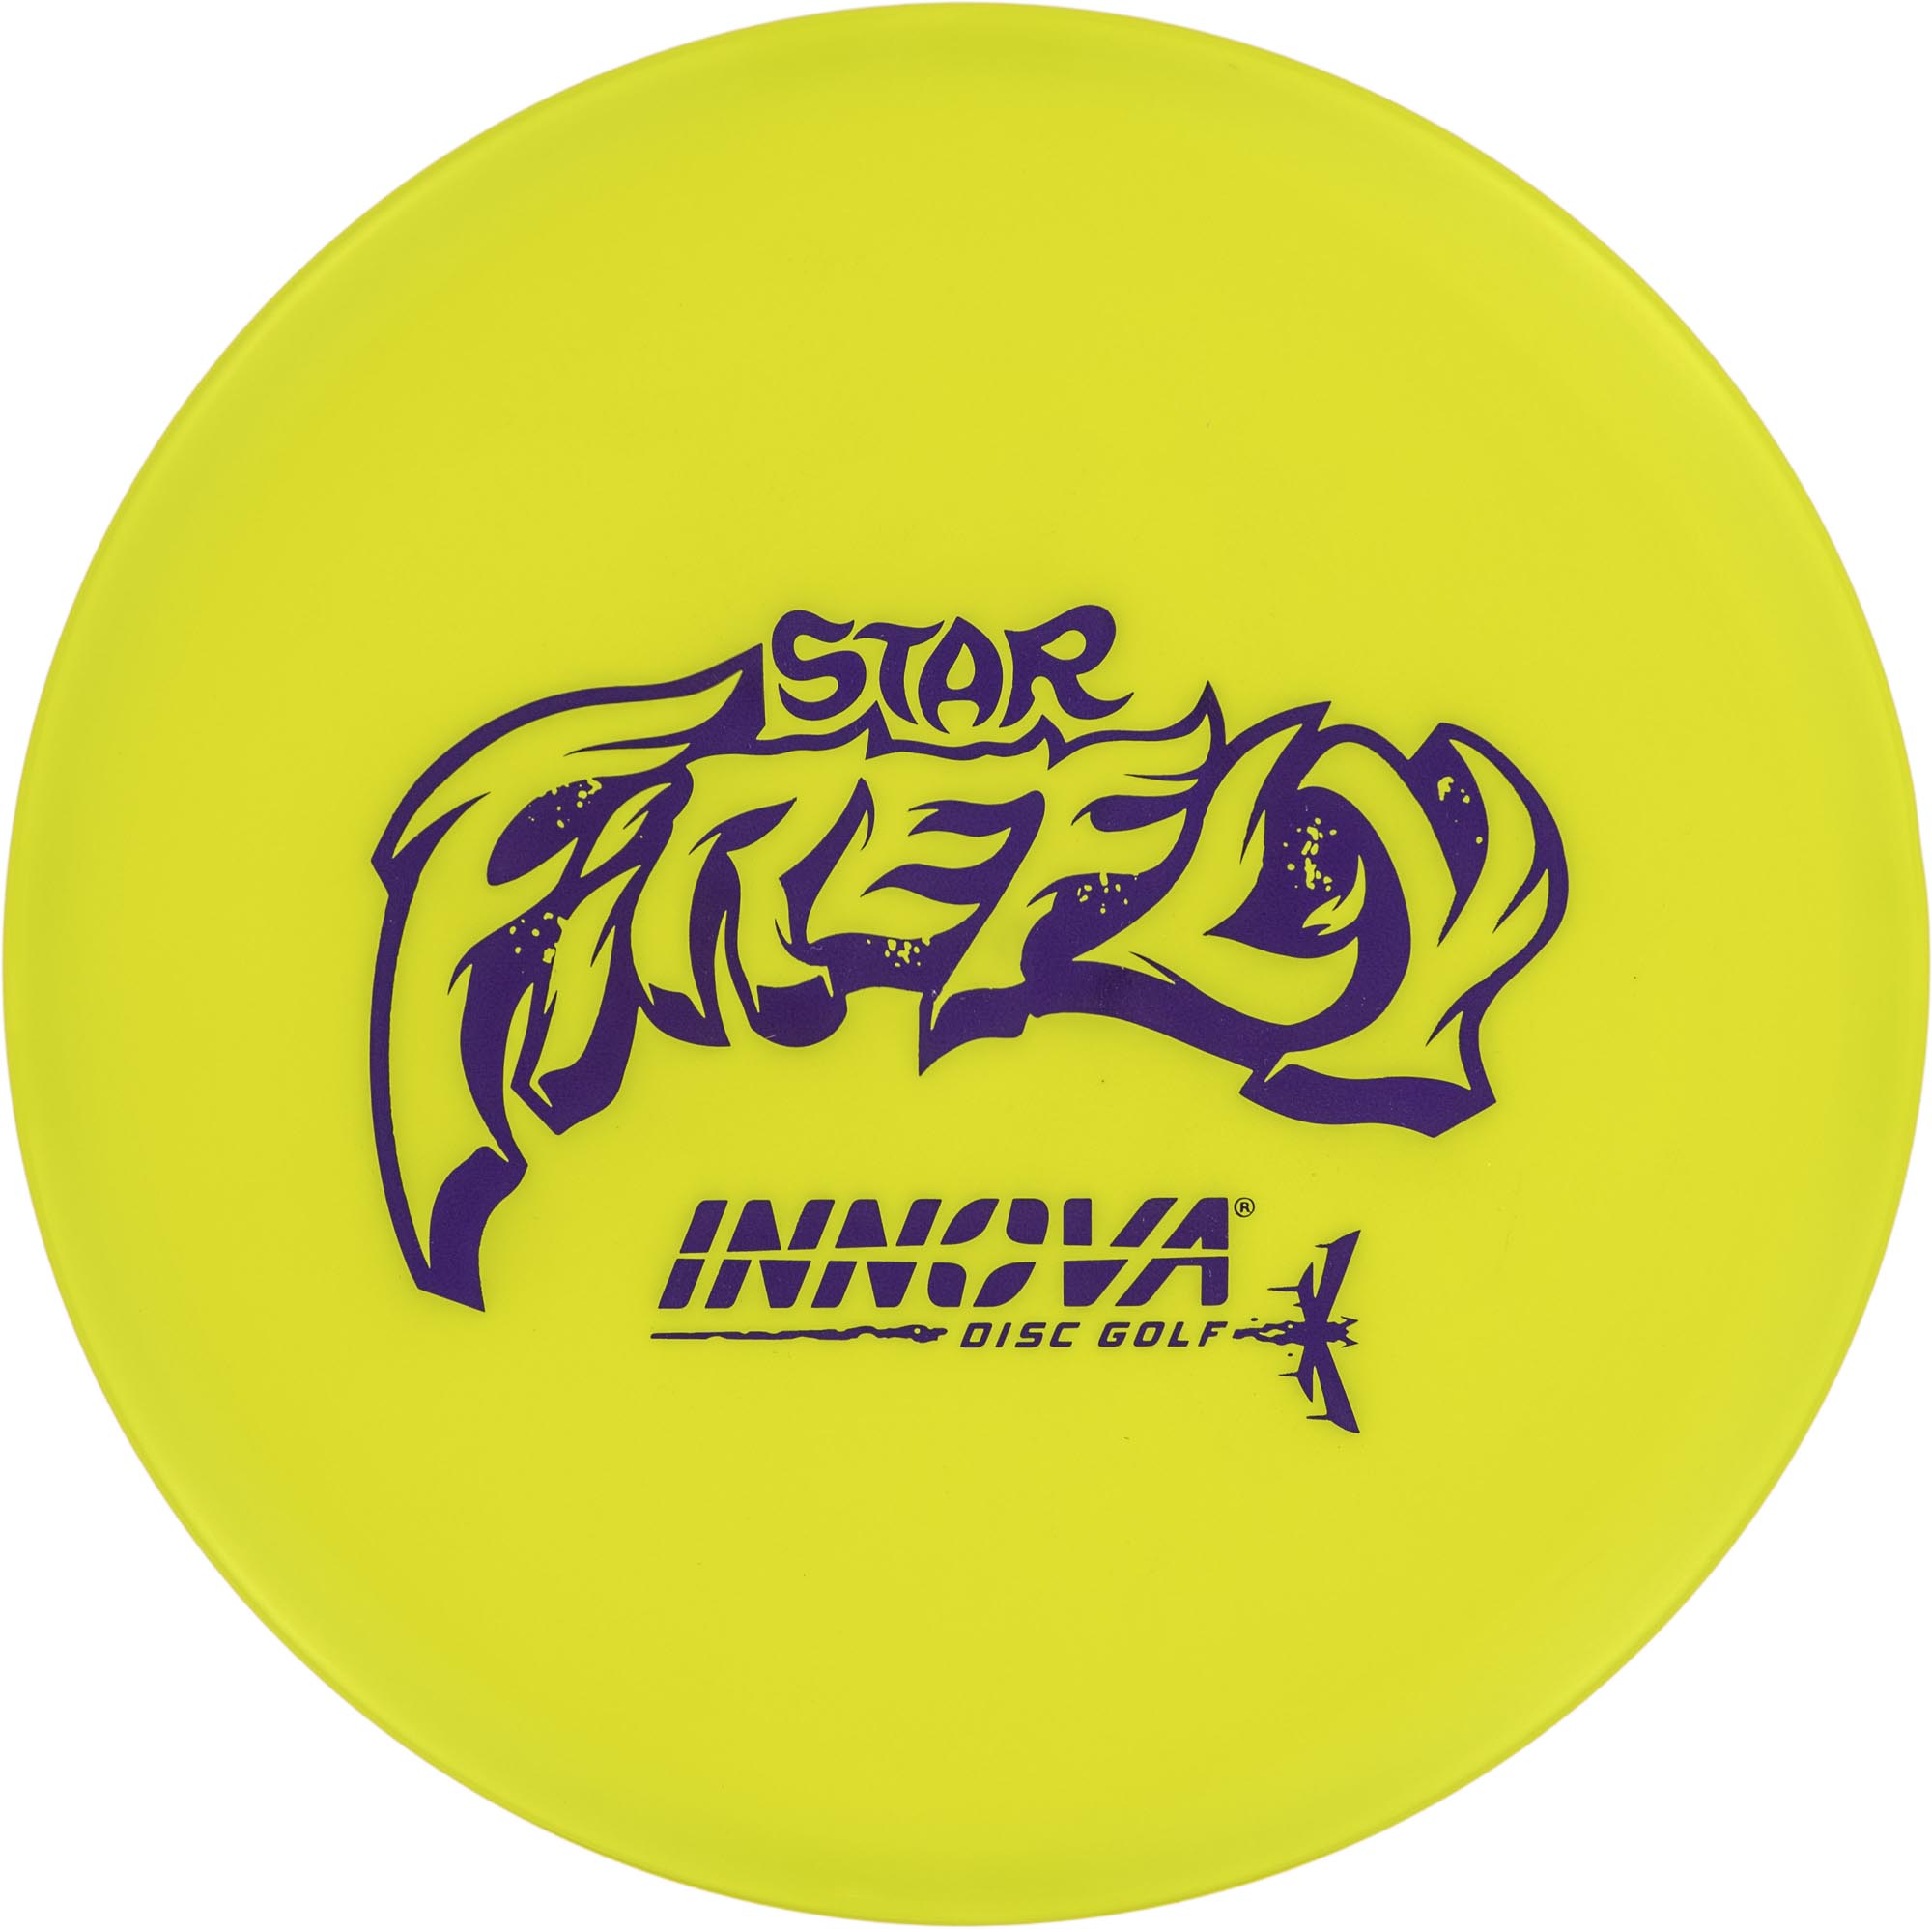 Star Firefly from Disc Golf United